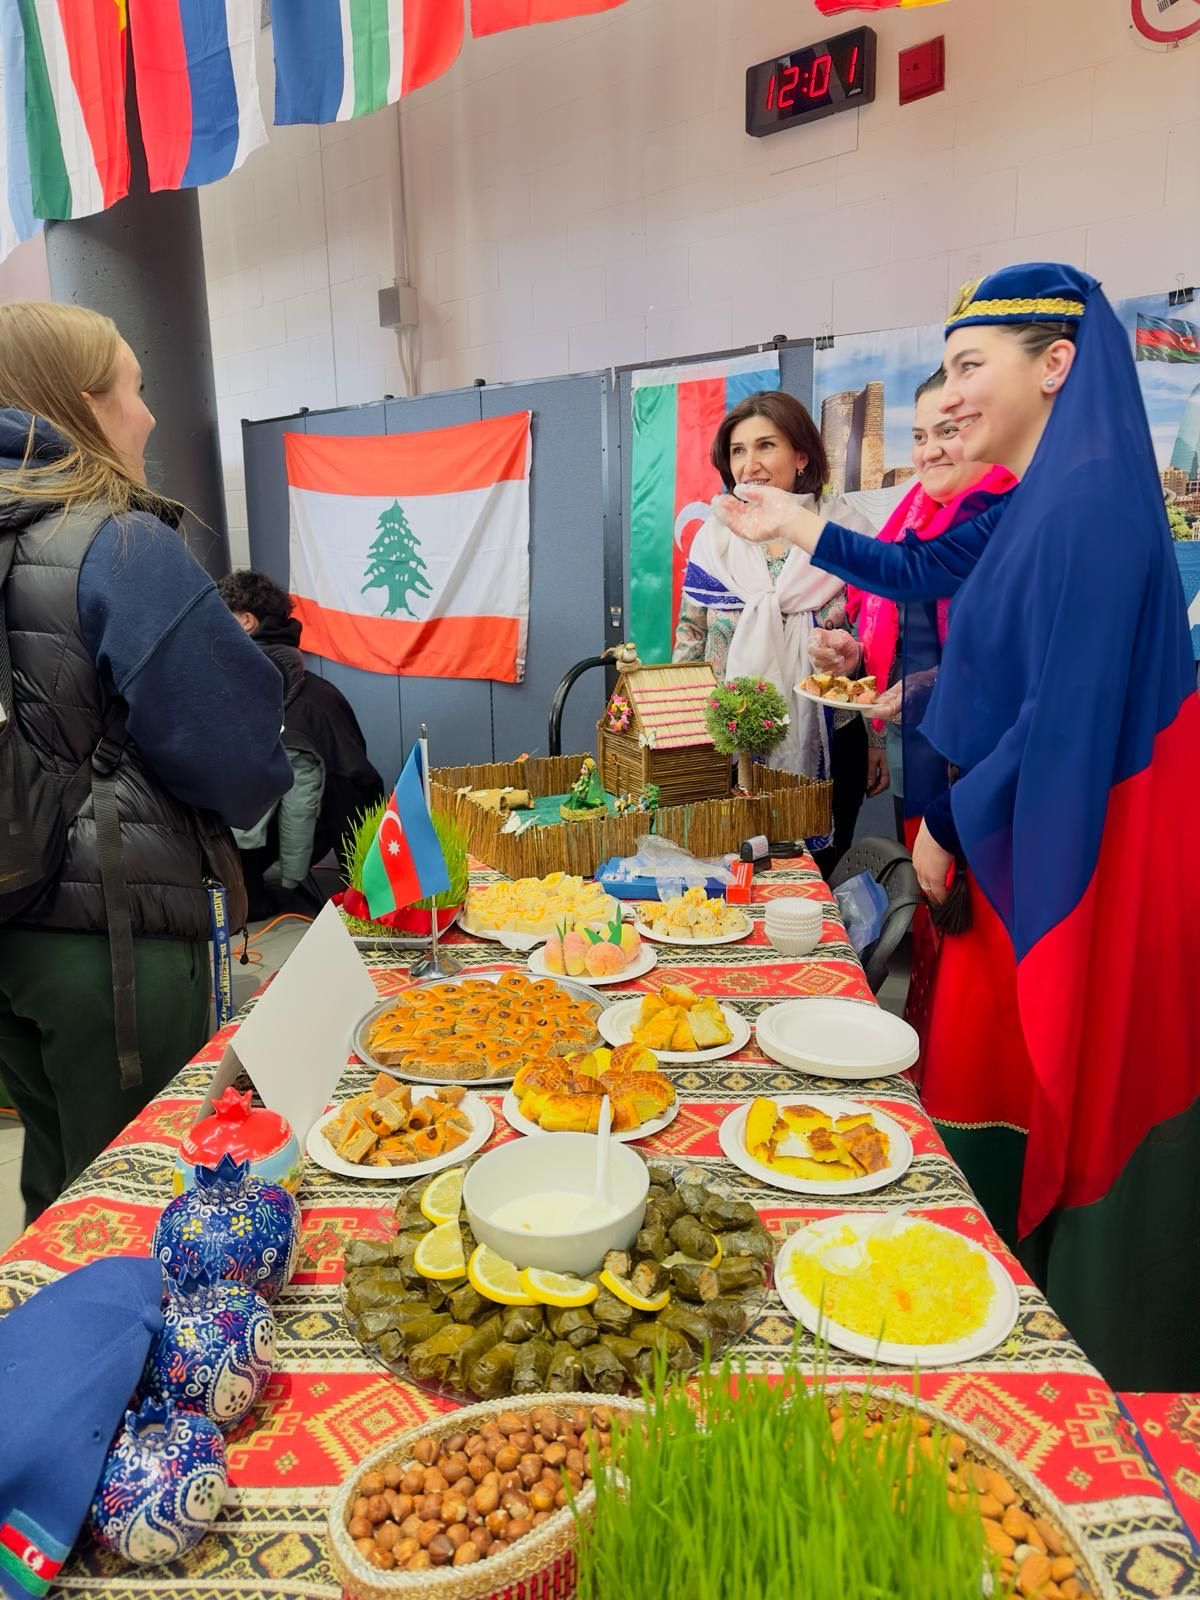 Azerbaijan was represented at the Multicultural festival held in Montreal